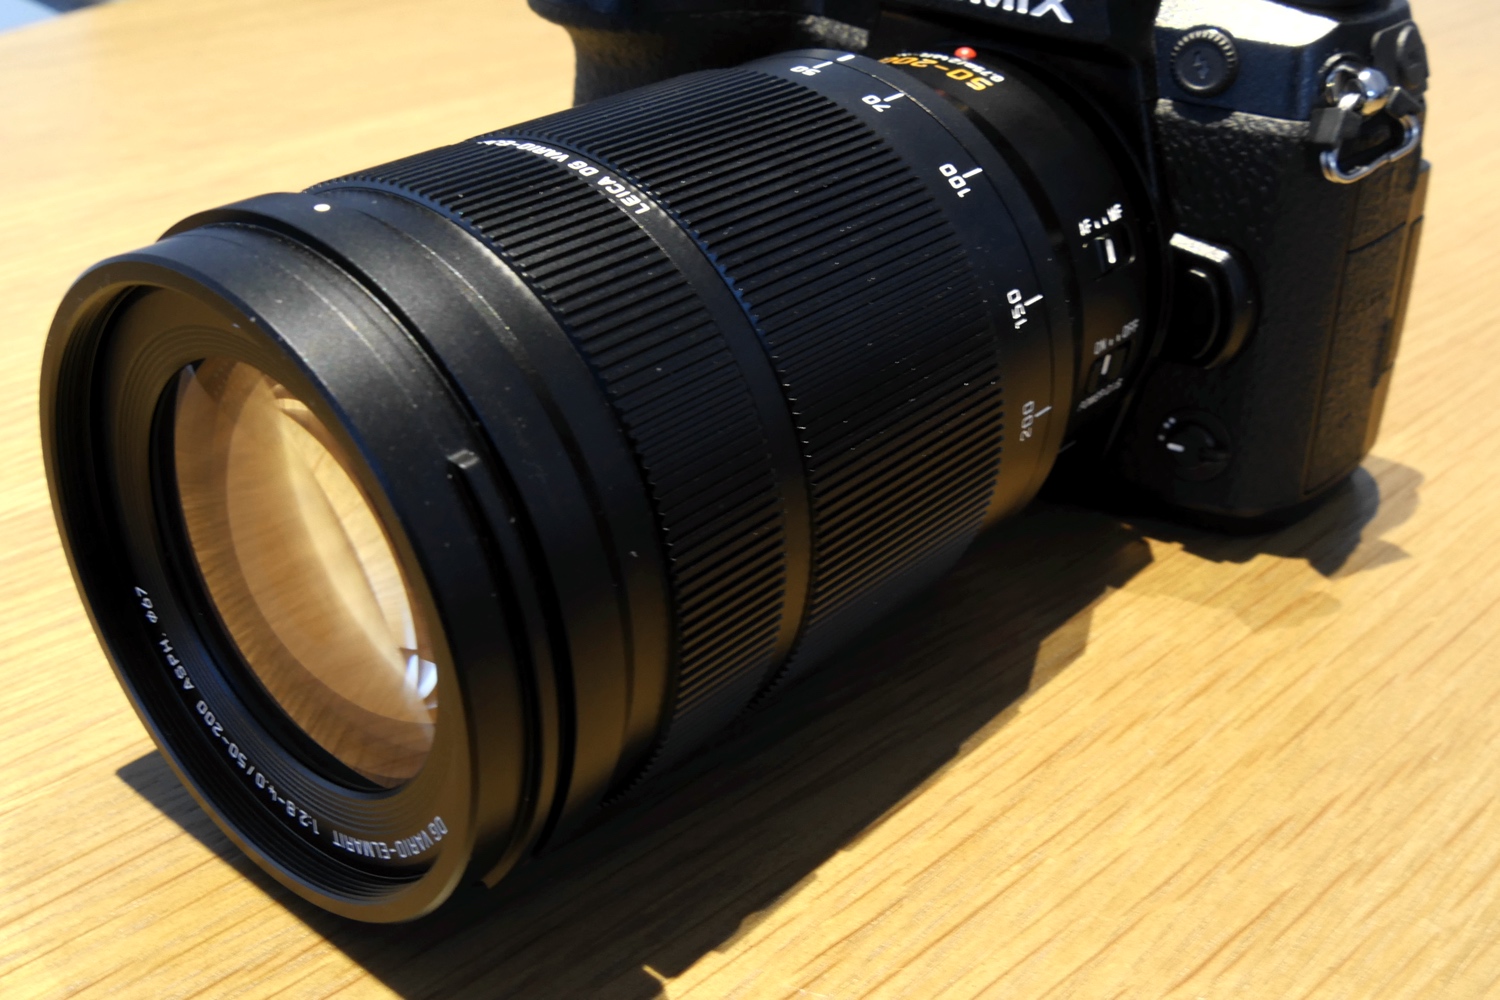 Panasonic's Latest Lens Delivers 200mm of Bright, Stabilized Zoom